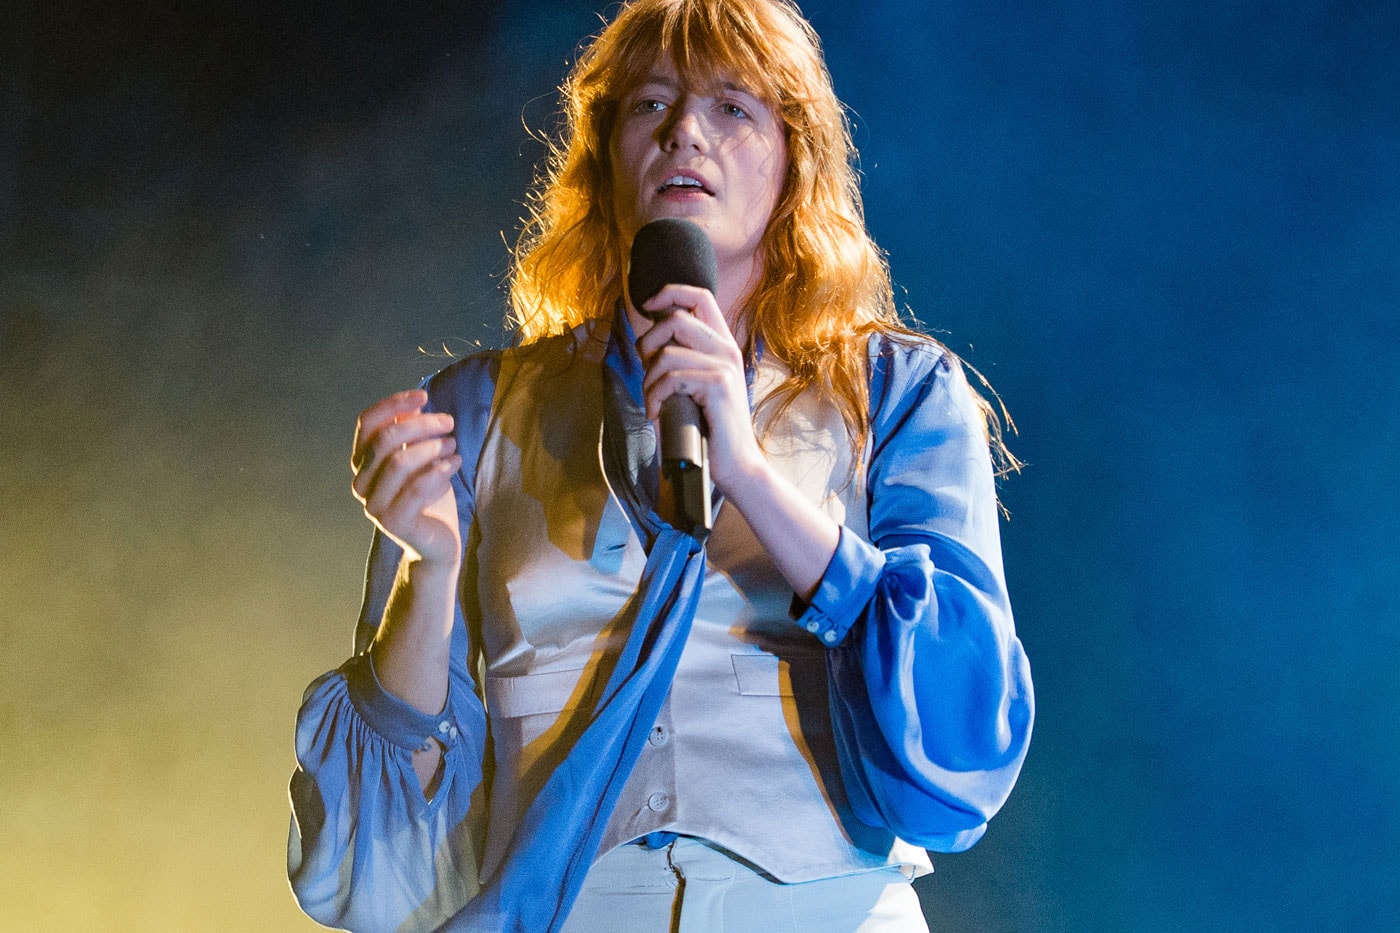 Florence And The Machine Cover Justin Bieber's "Where Are Ü Now"